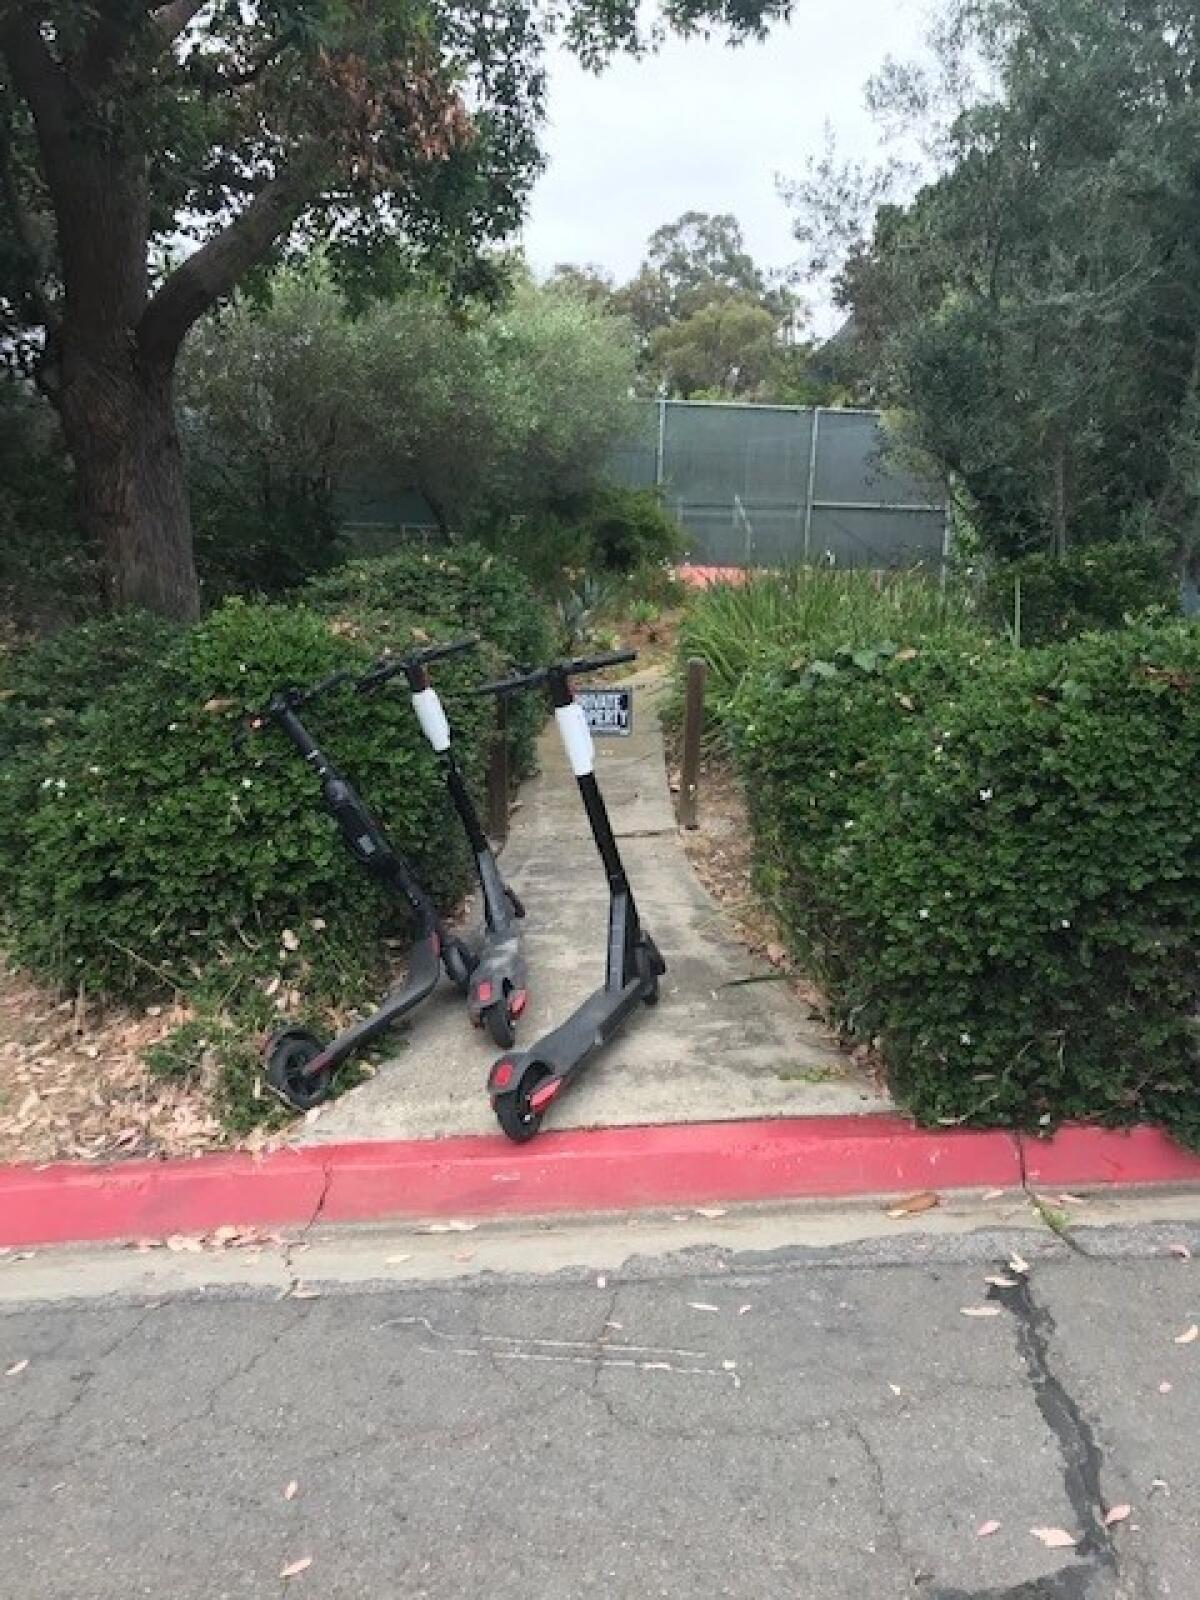 Scooters are left a few feet from a La Jolla resident's "private property" sign.